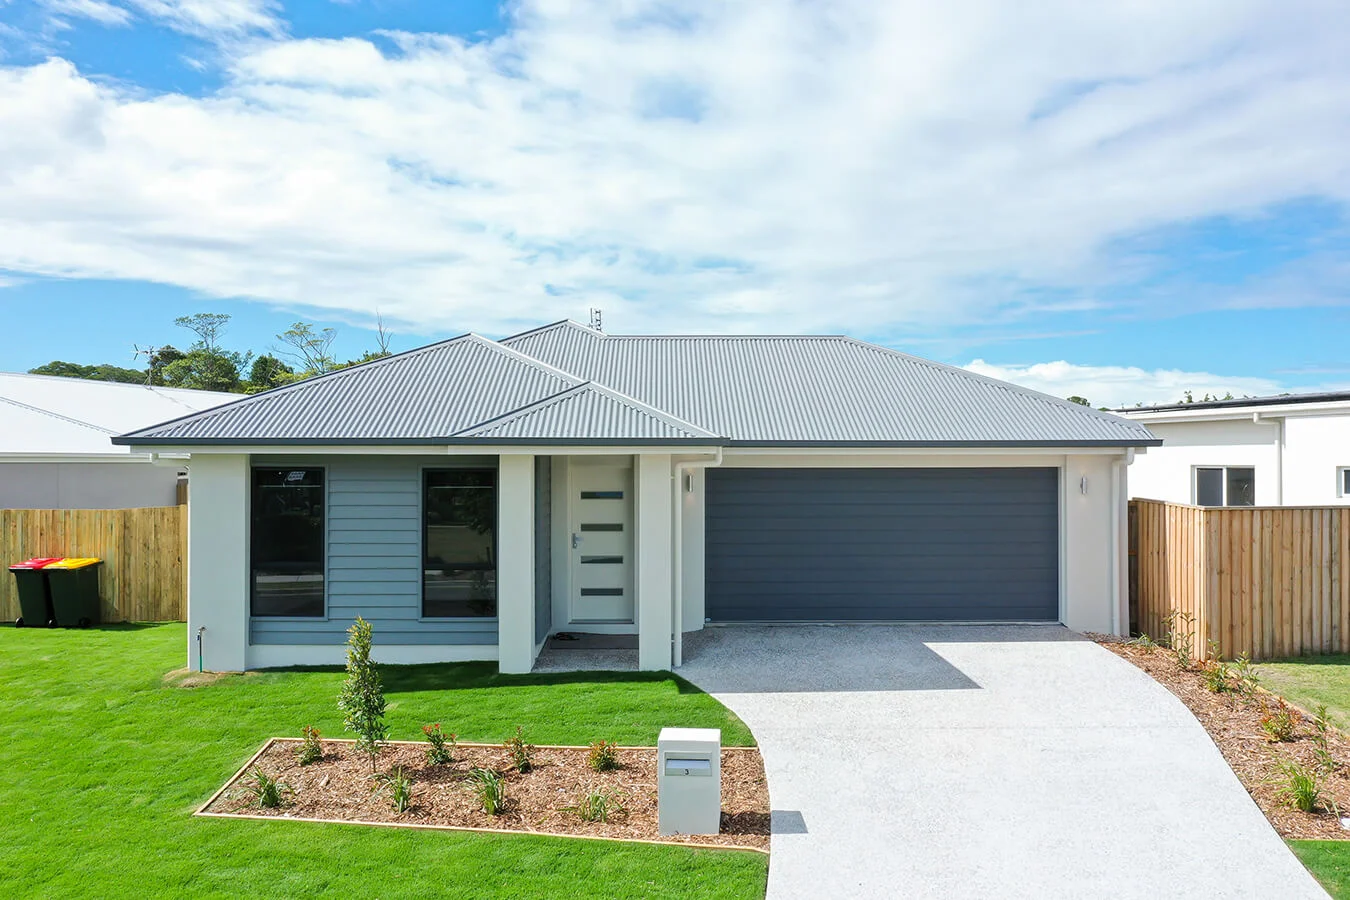 Front of the house in Narangba developed by No1 Property Guide